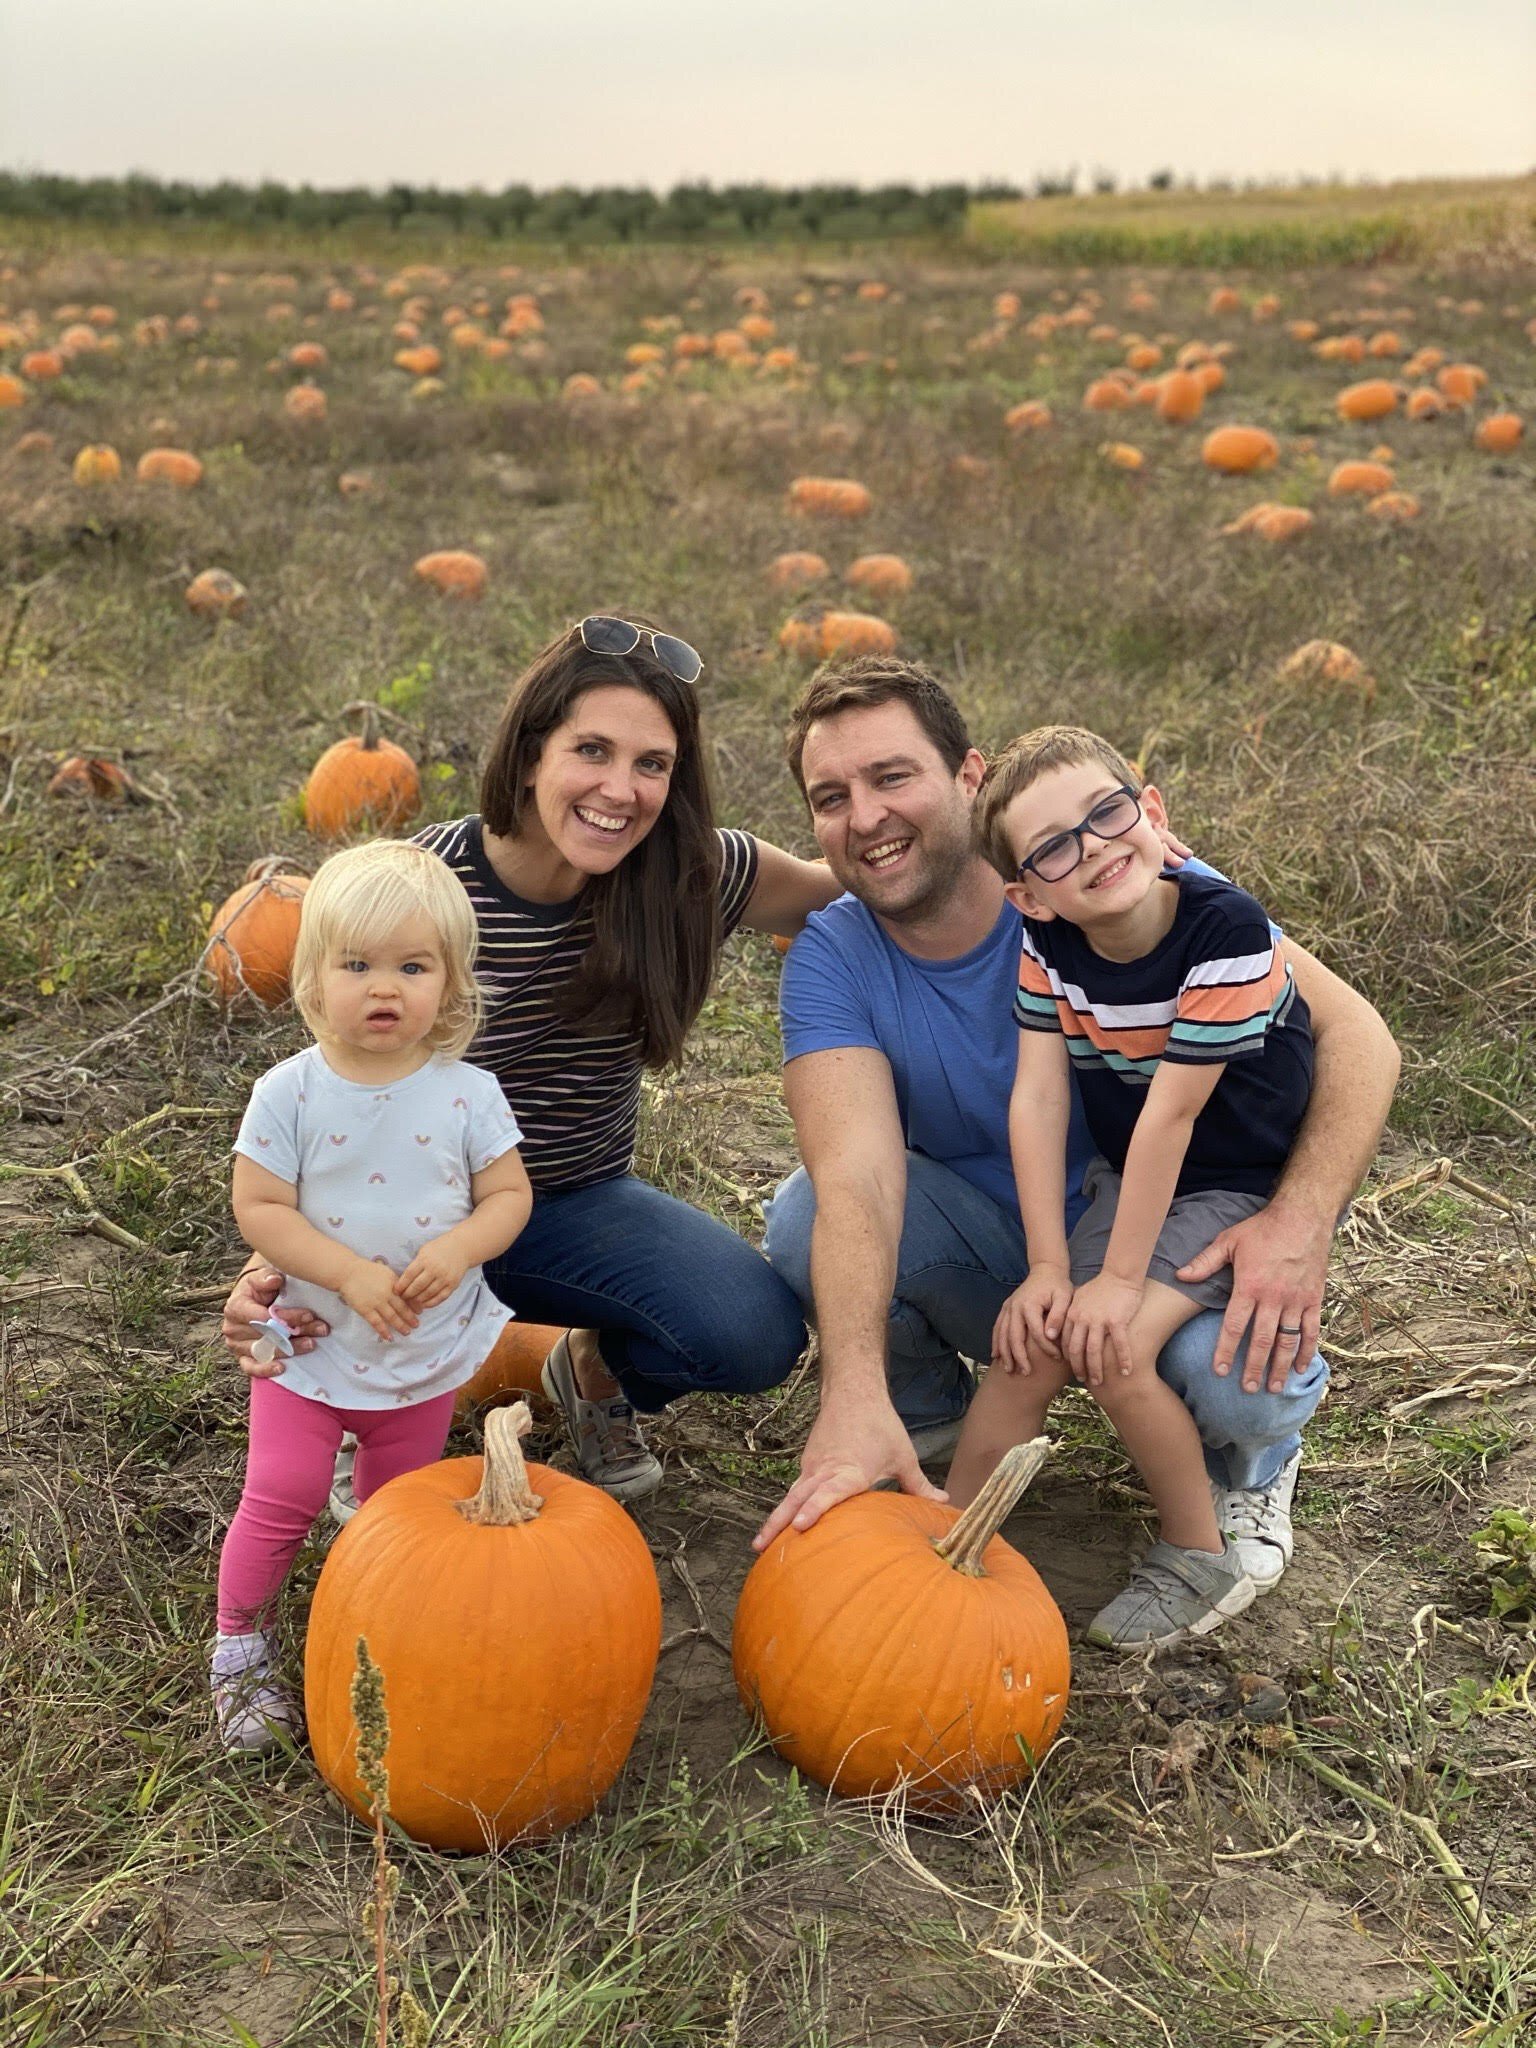 Kristen Petruniw grew up in Indianapolis before moving to Wabash 11 years ago and starting her family with her husband, Josh.